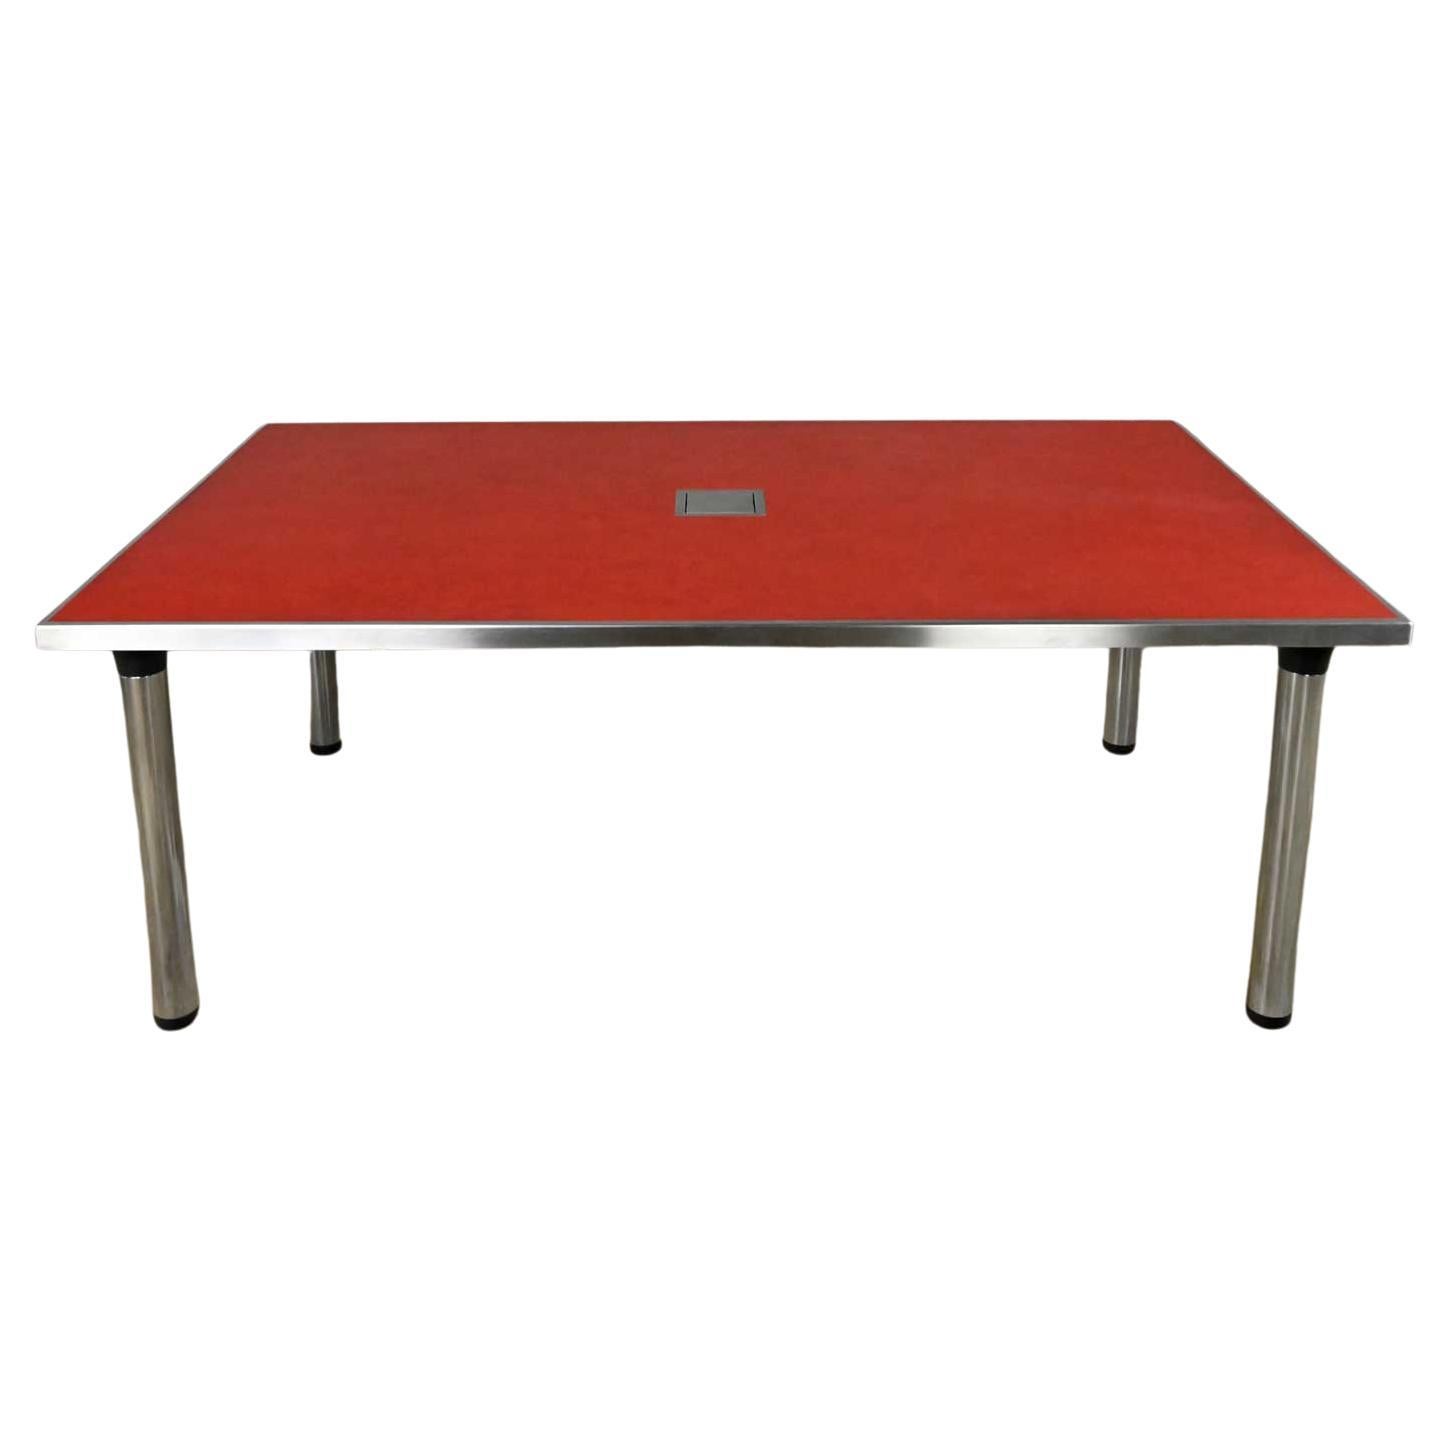 Modern Red Marmoleum & Chrome Powered Custom Work or Dining Table Black Accents